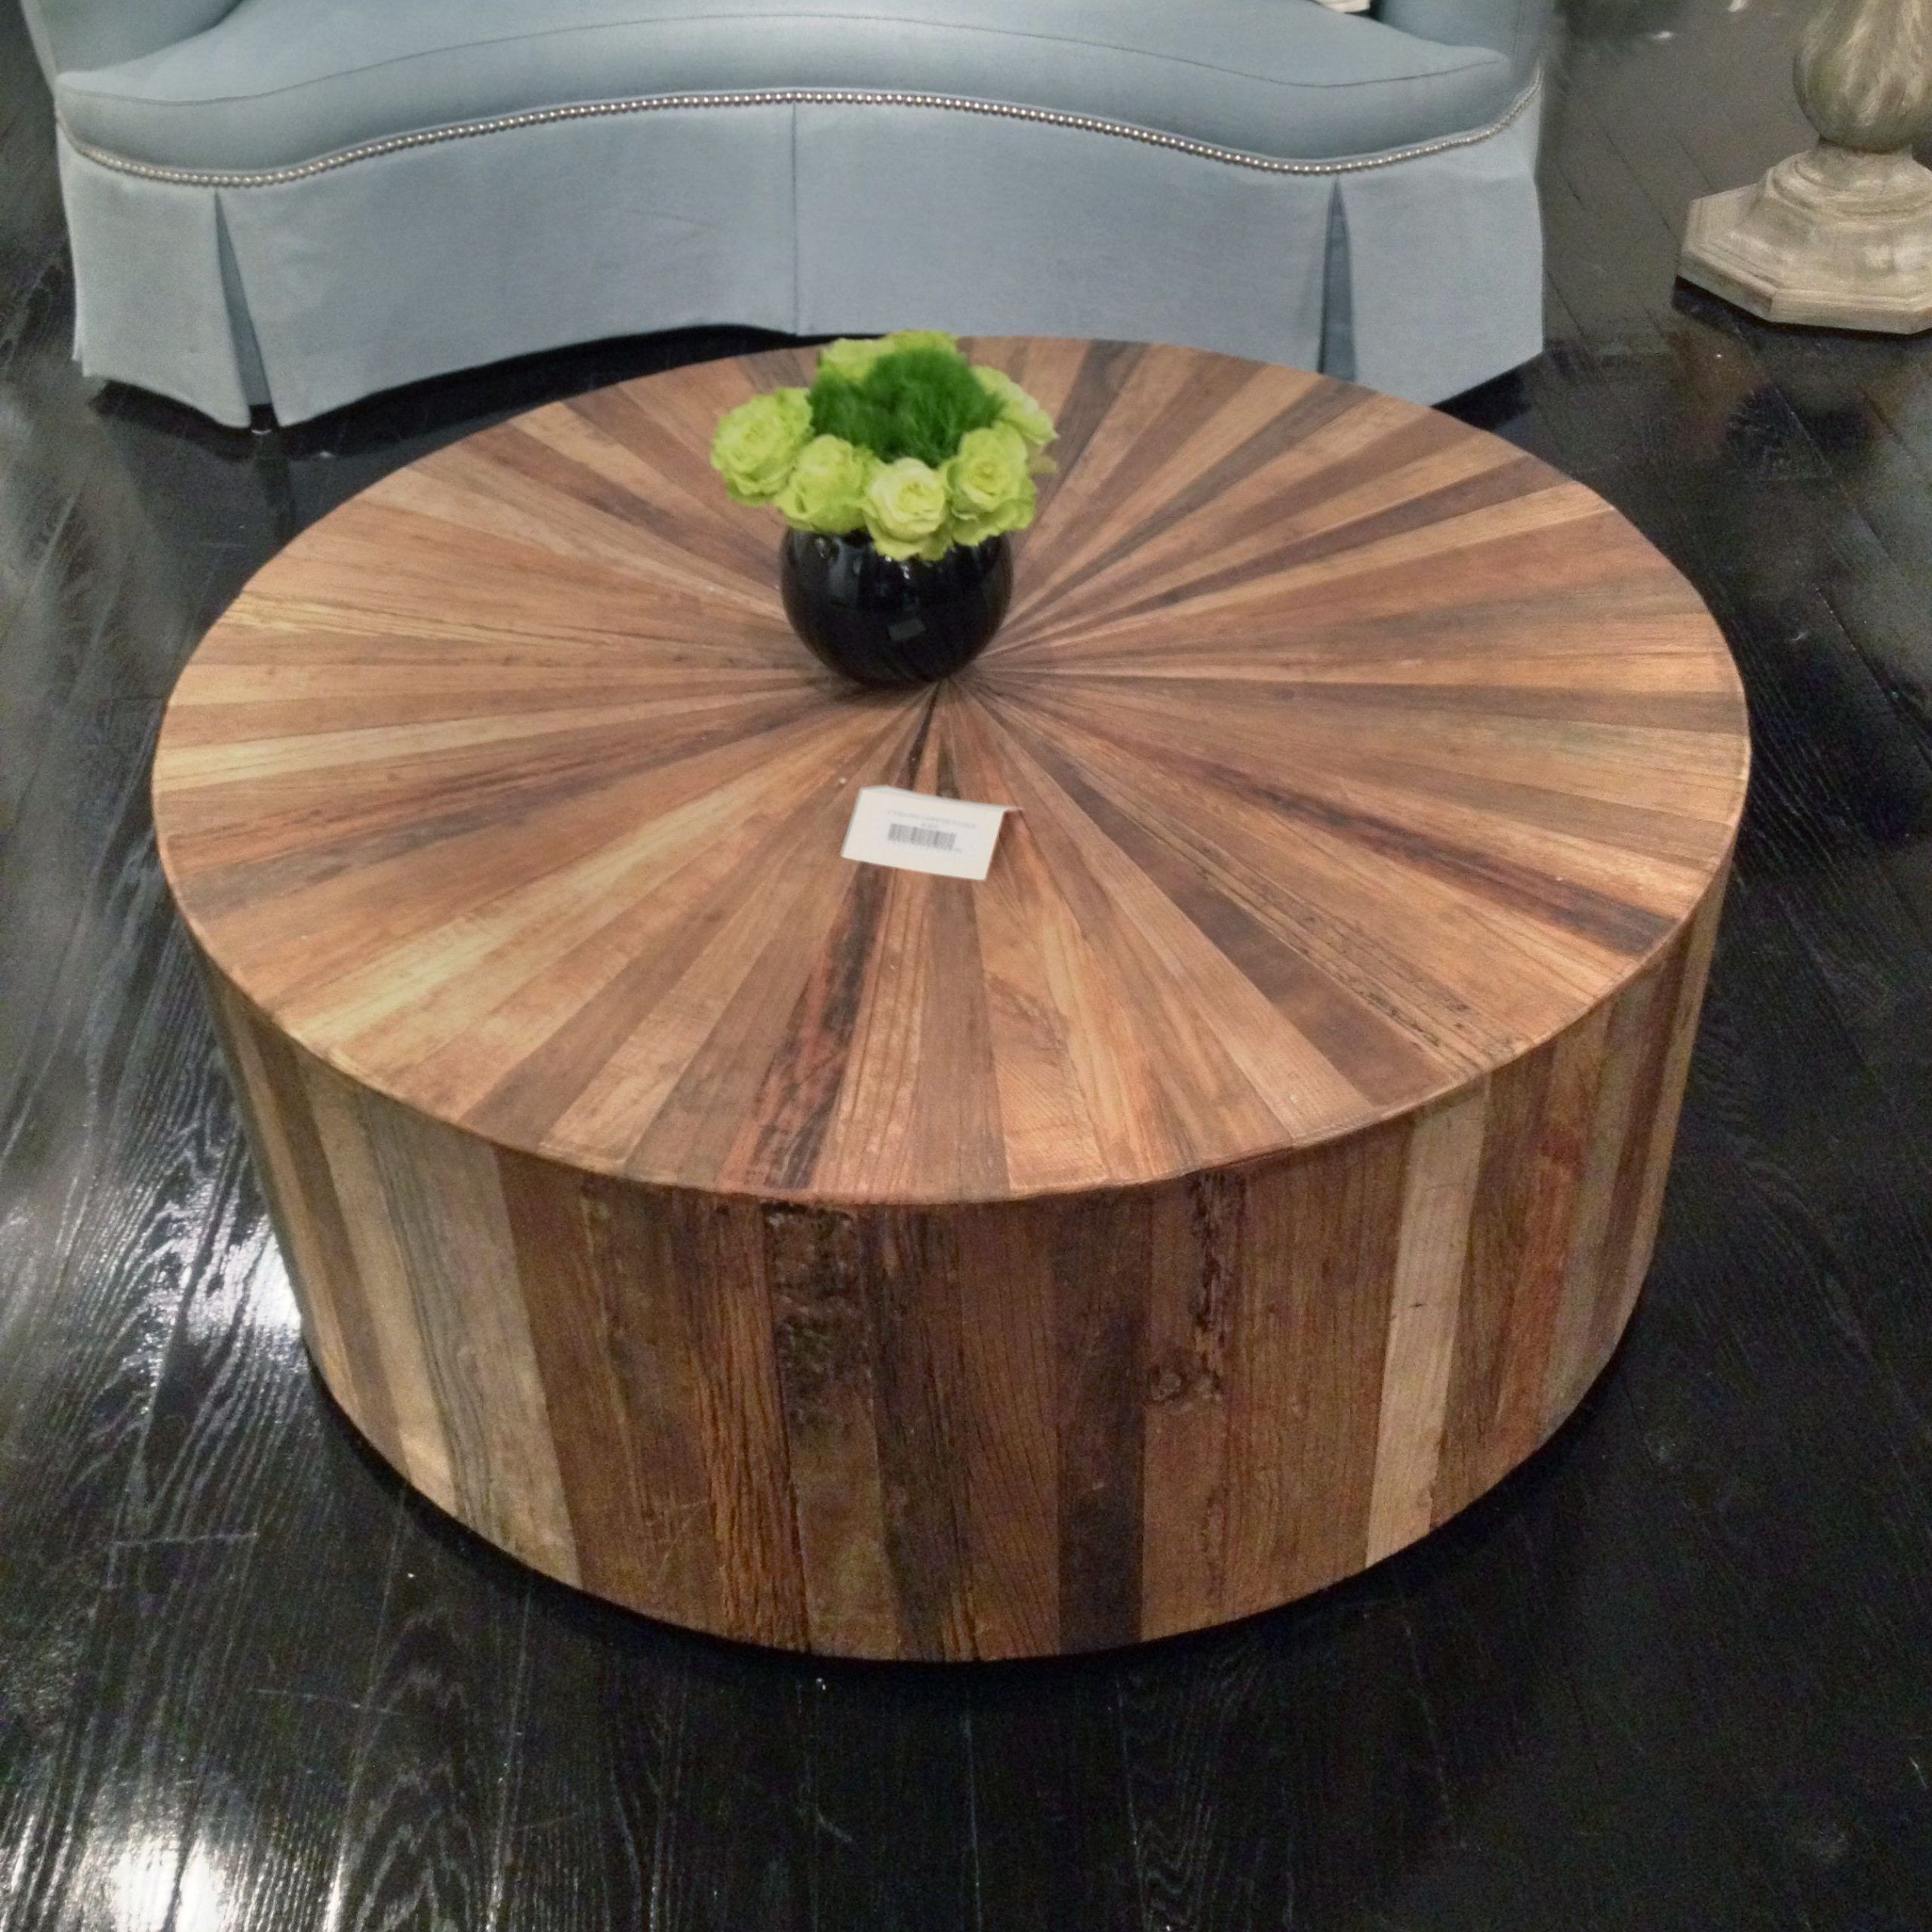 Round Wood Coffee Tables With Storage : Yj Round Storage Coffee Table Intended For Round Coffee Tables (View 9 of 20)